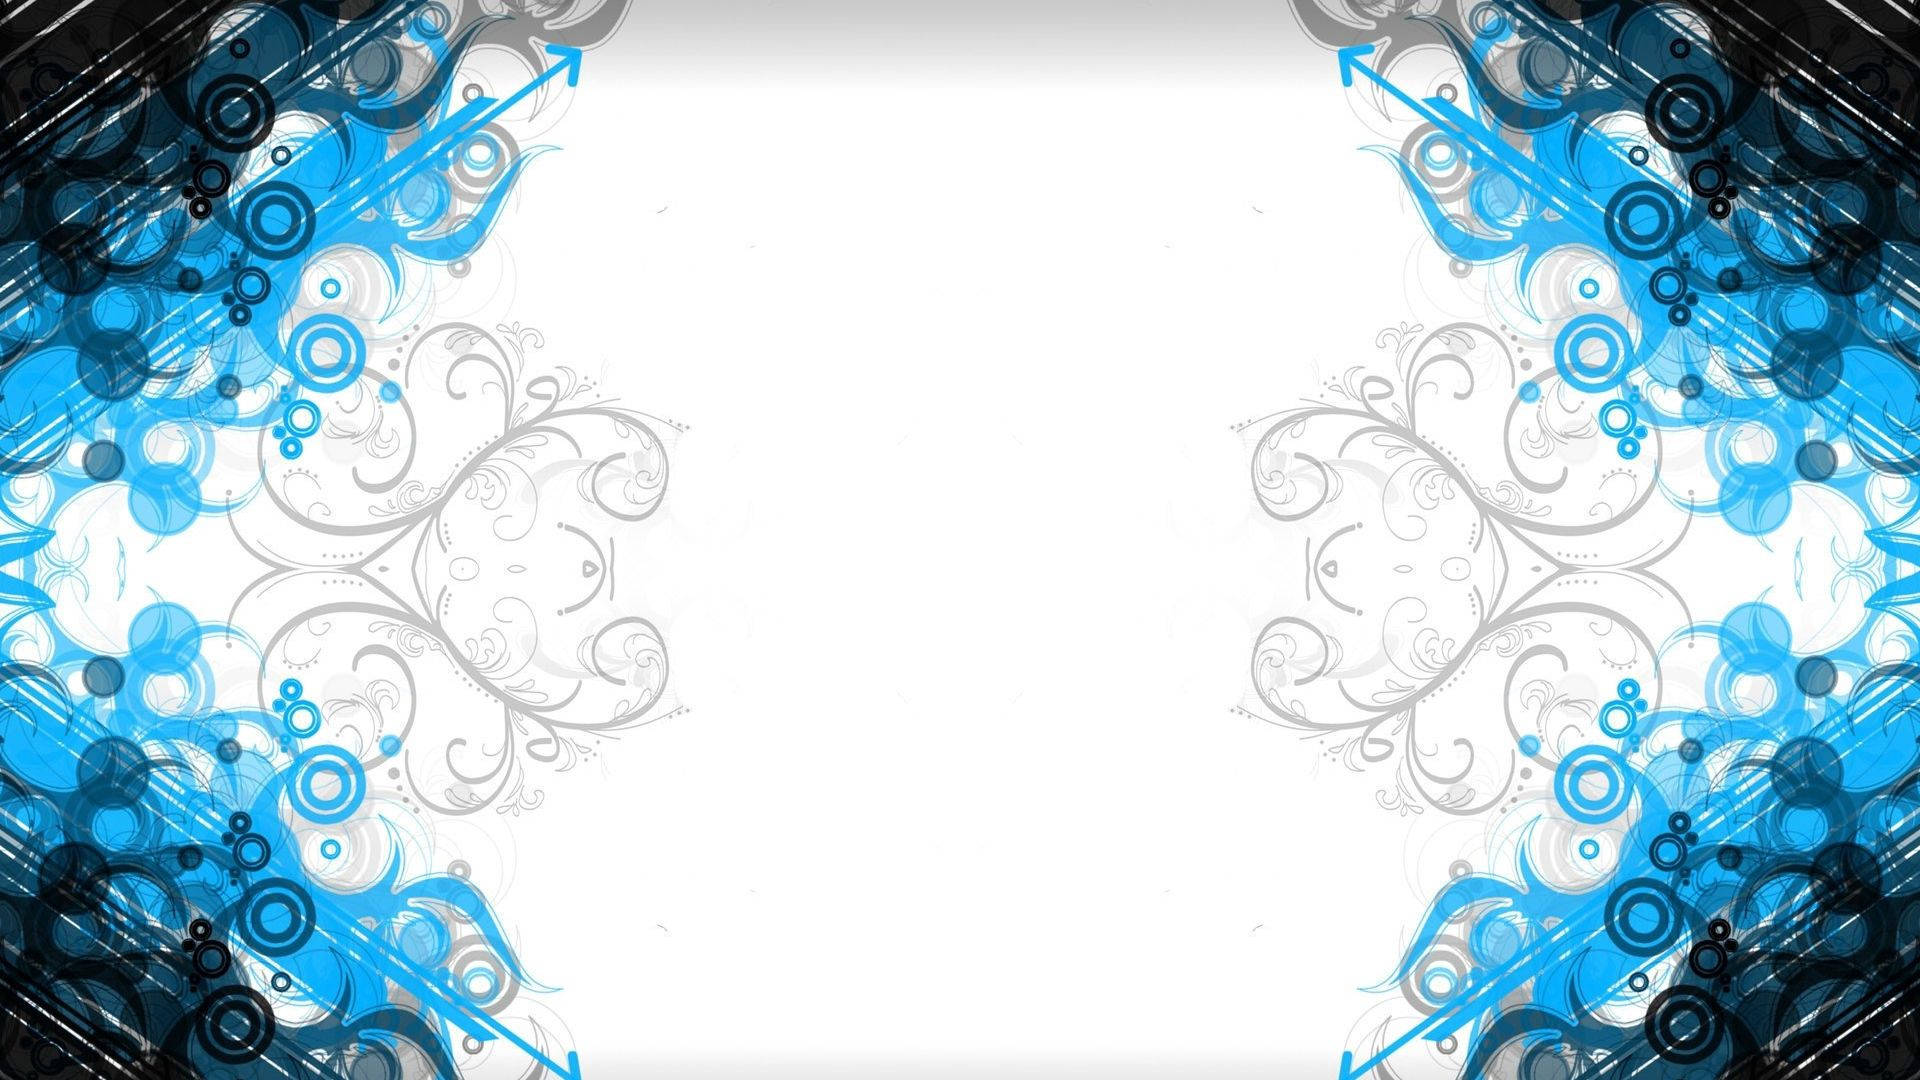 Curly Borders In Black Blue And White Background